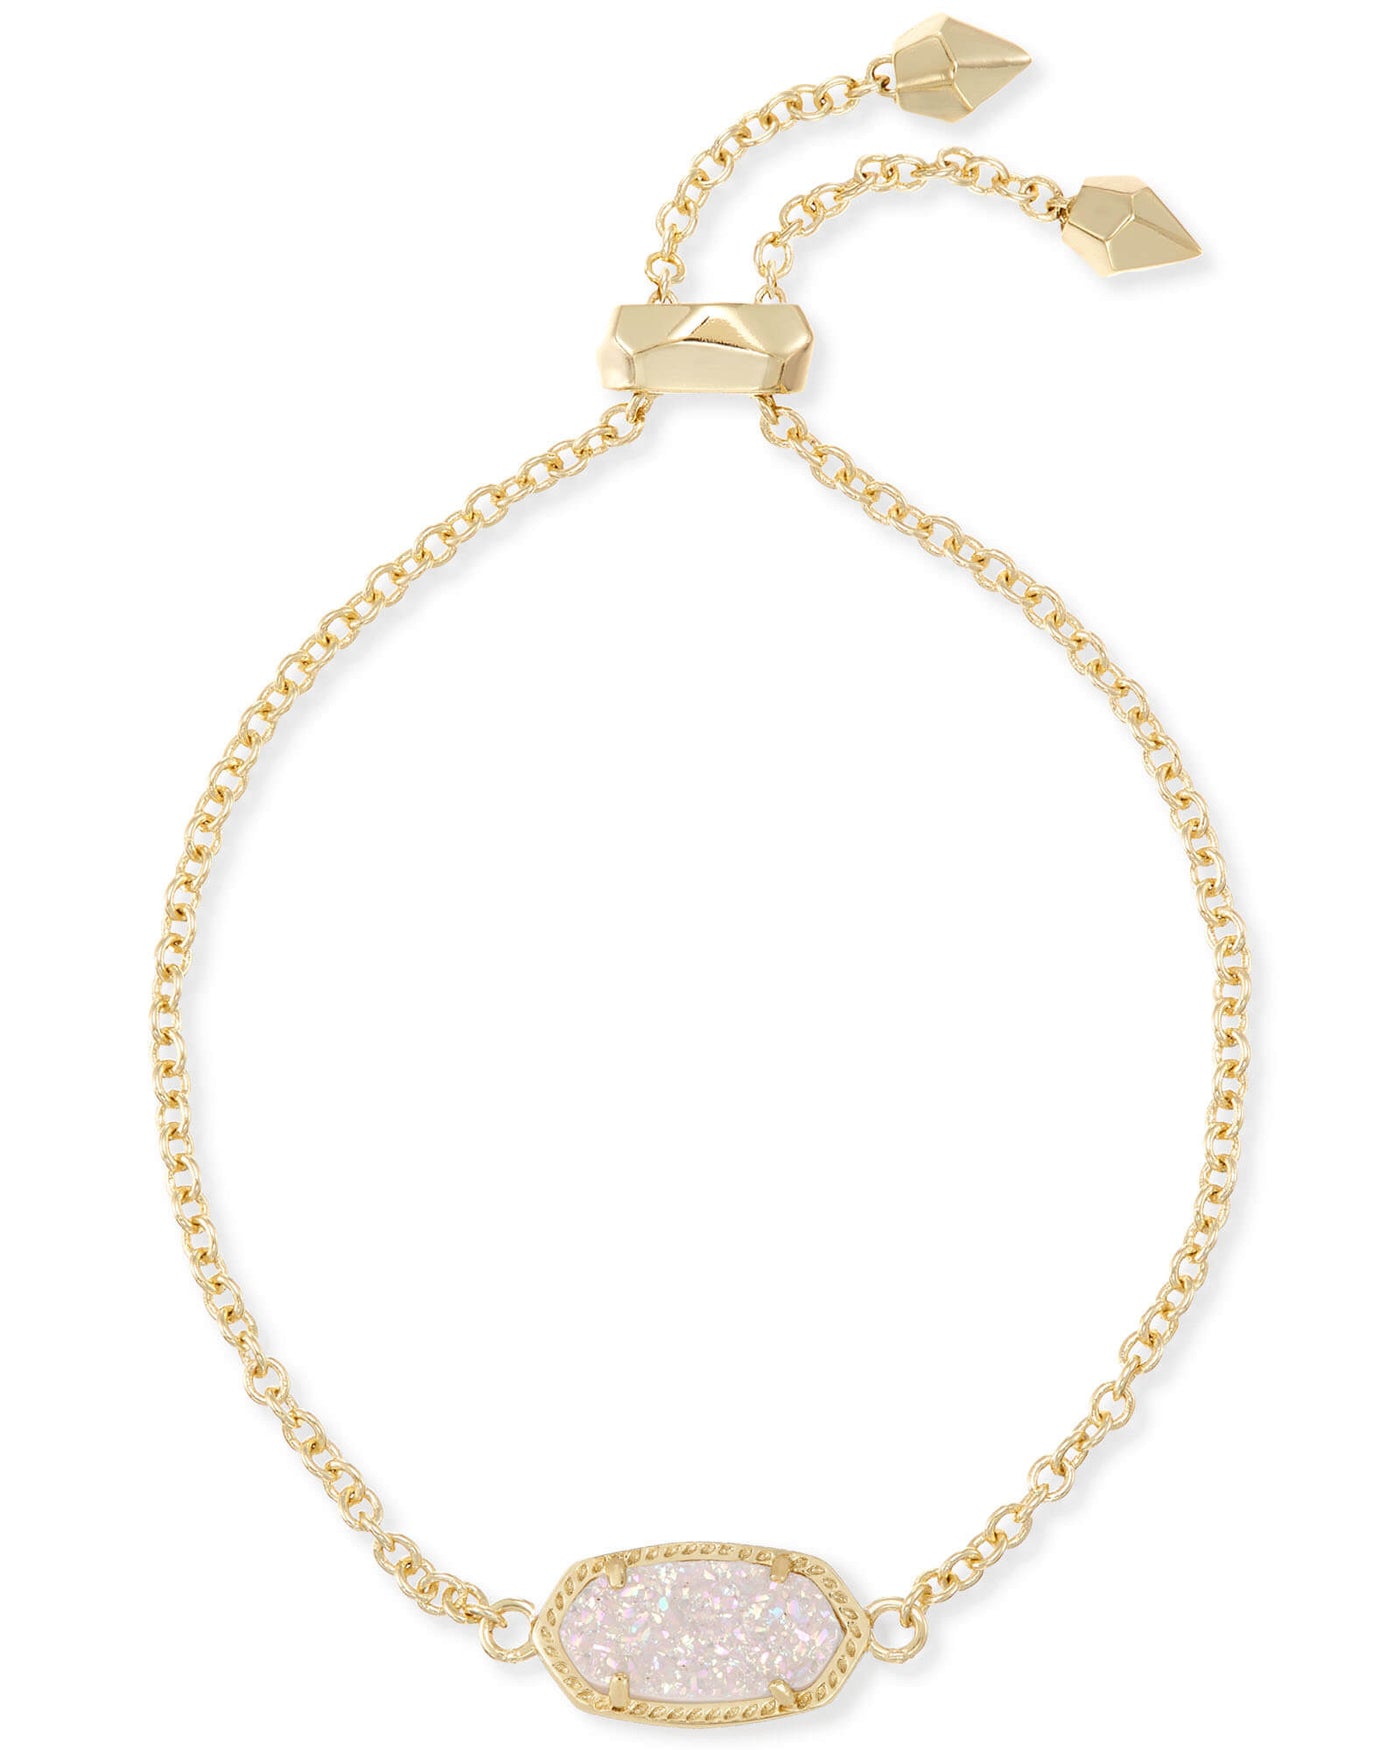 Kendra Scott Elaina Gold Adjustable Chain Bracelet in Iridescent Drusy-Bracelets-Kendra Scott-Market Street Nest, Fashionable Clothing, Shoes and Home Décor Located in Mabank, TX